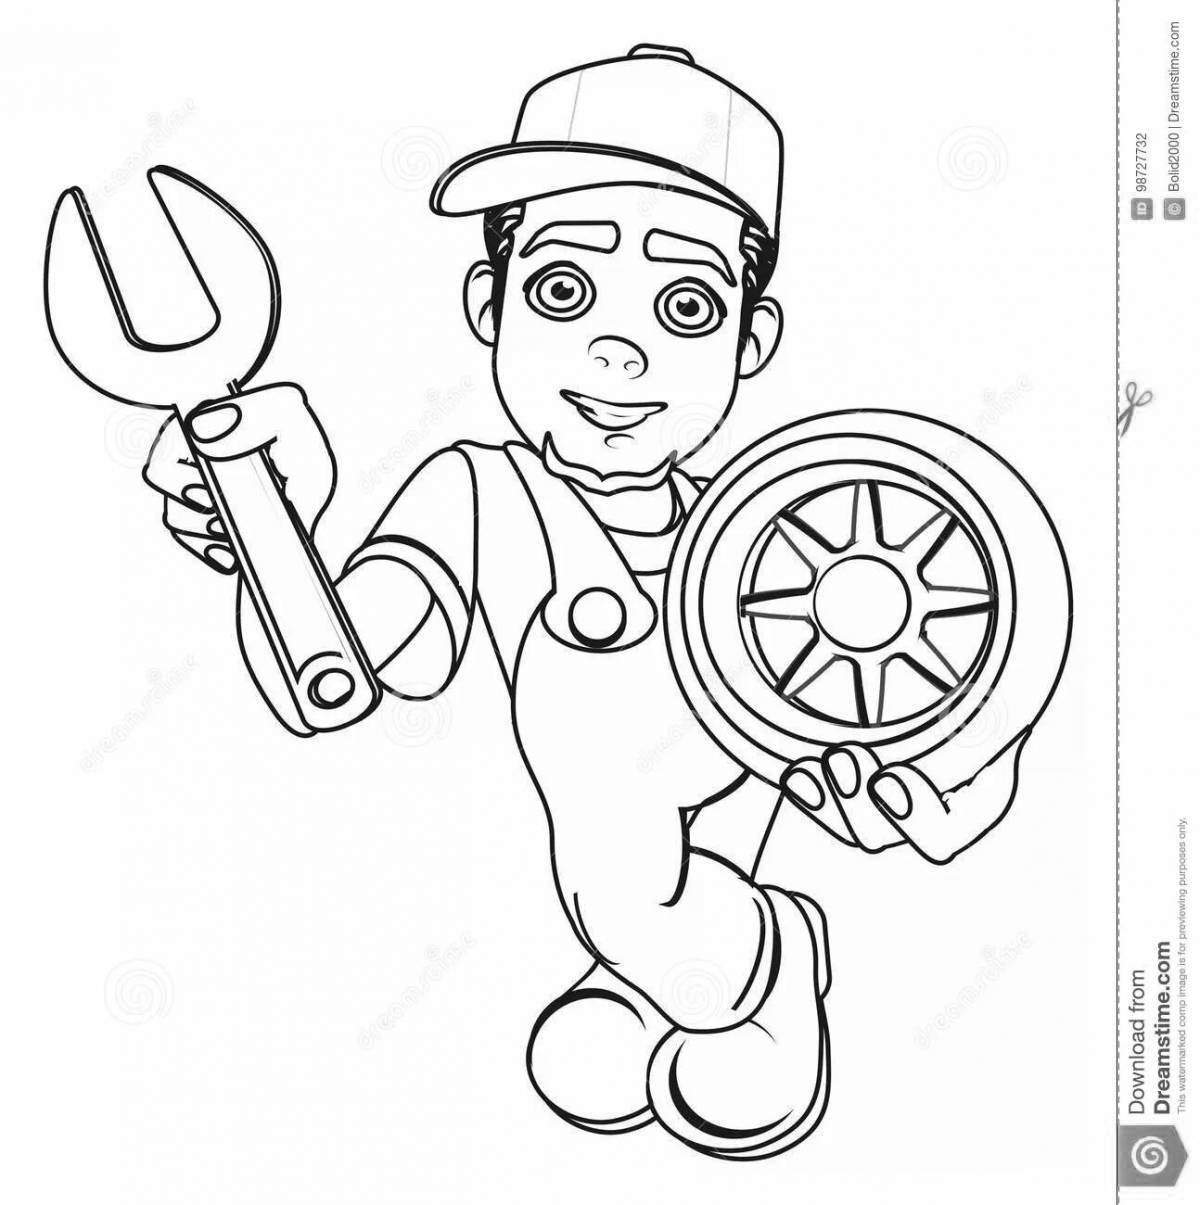 Coloring page playful car mechanic